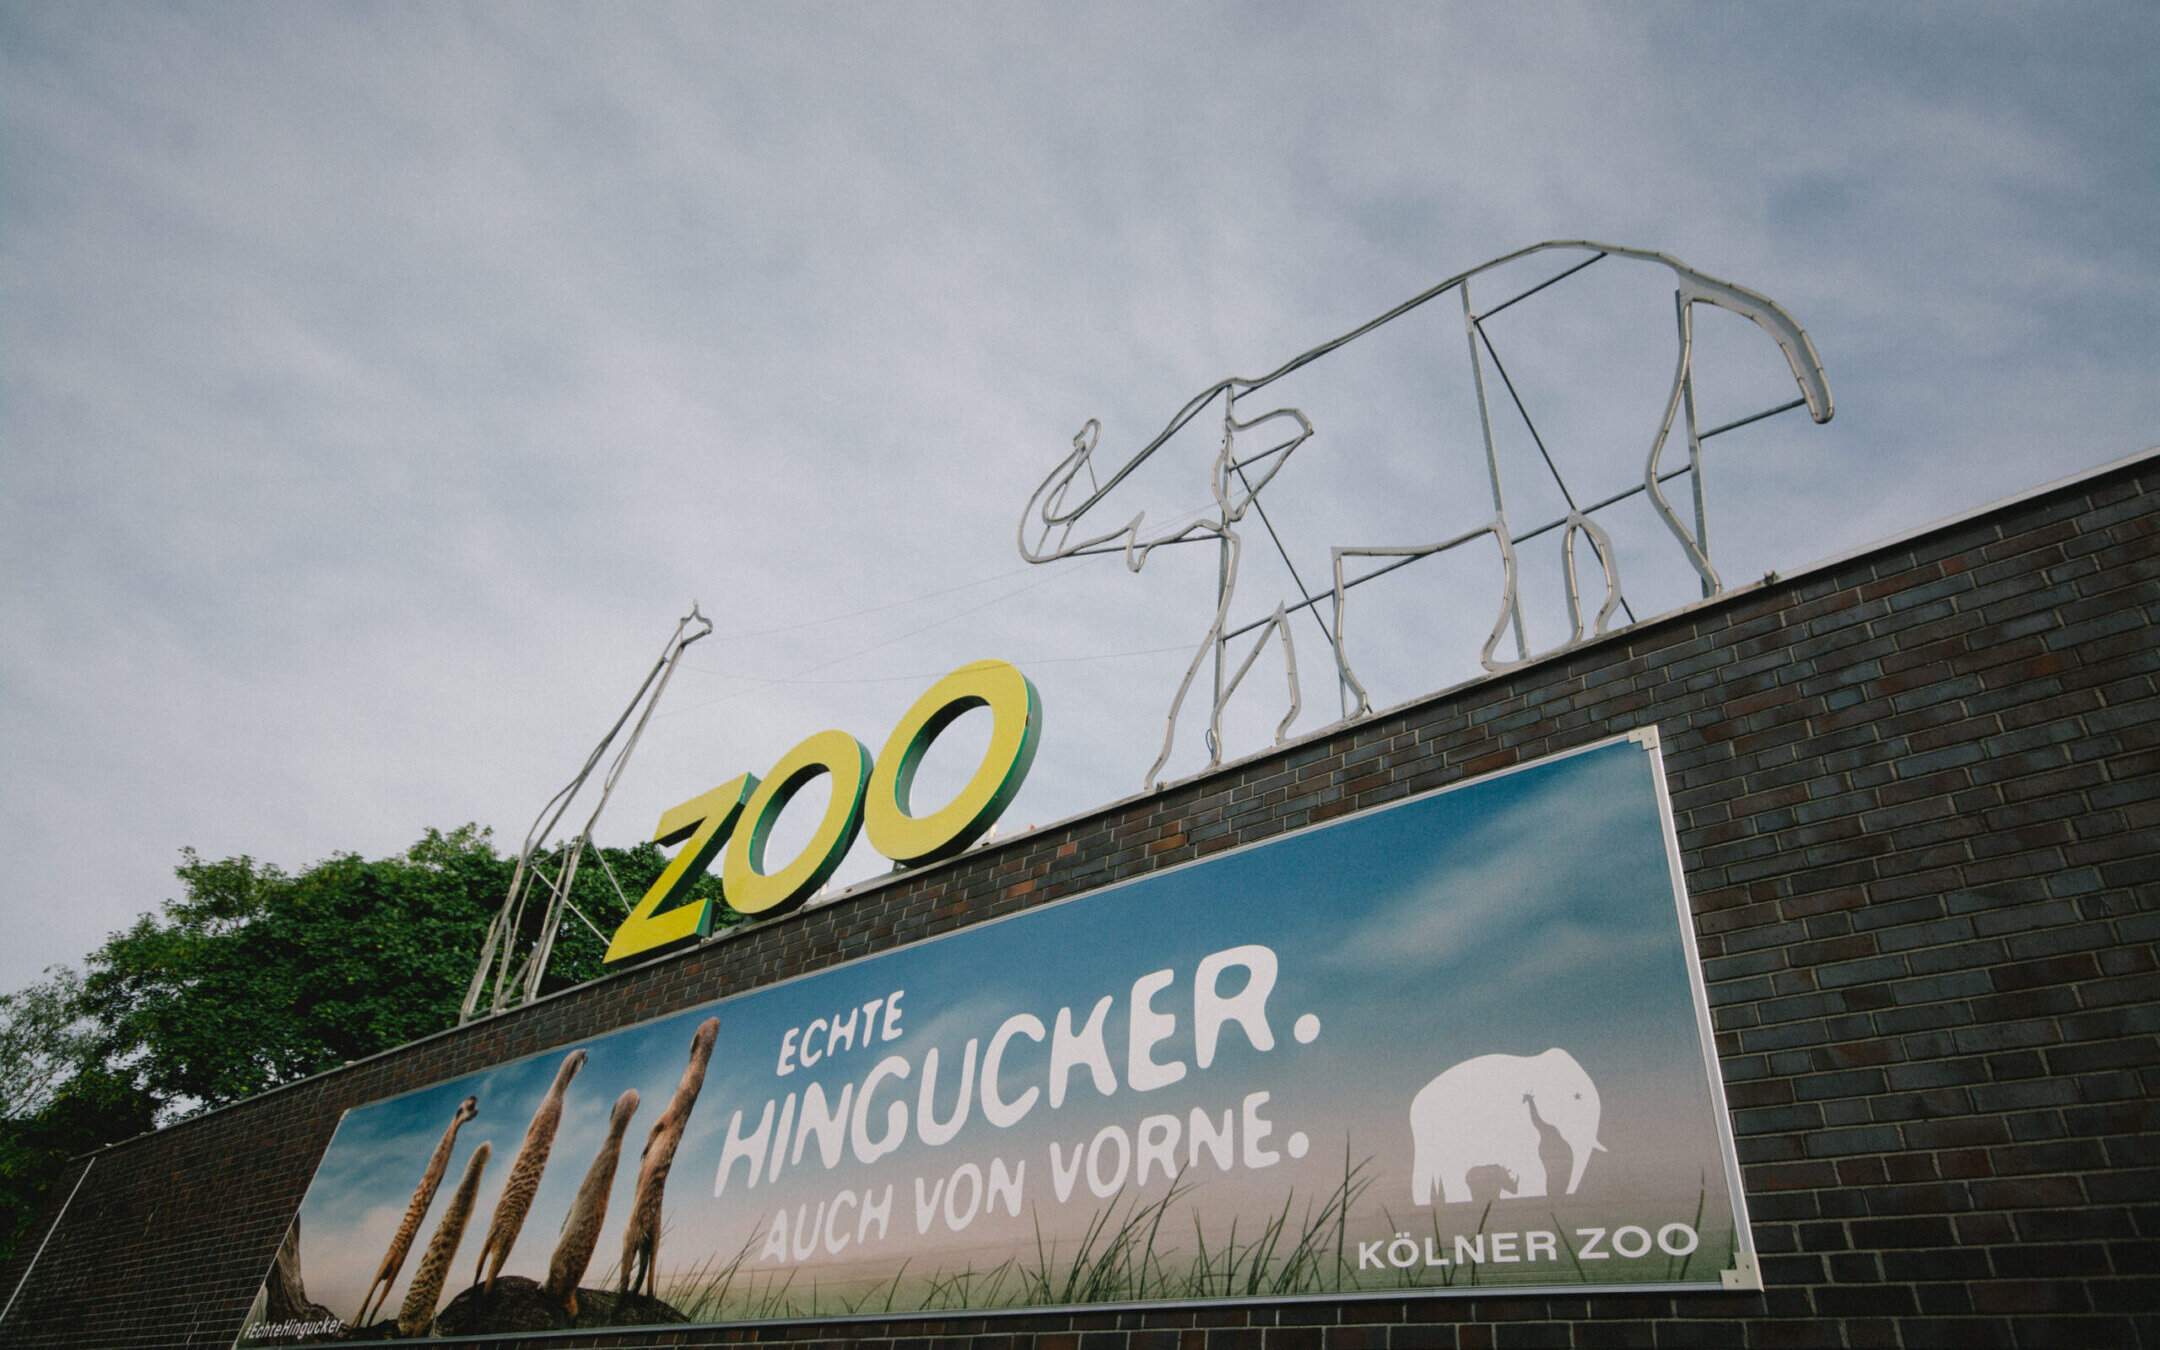 The Cologne Zoo logo is seen from the entrance. (Ying Tang/NurPhoto via Getty Images)